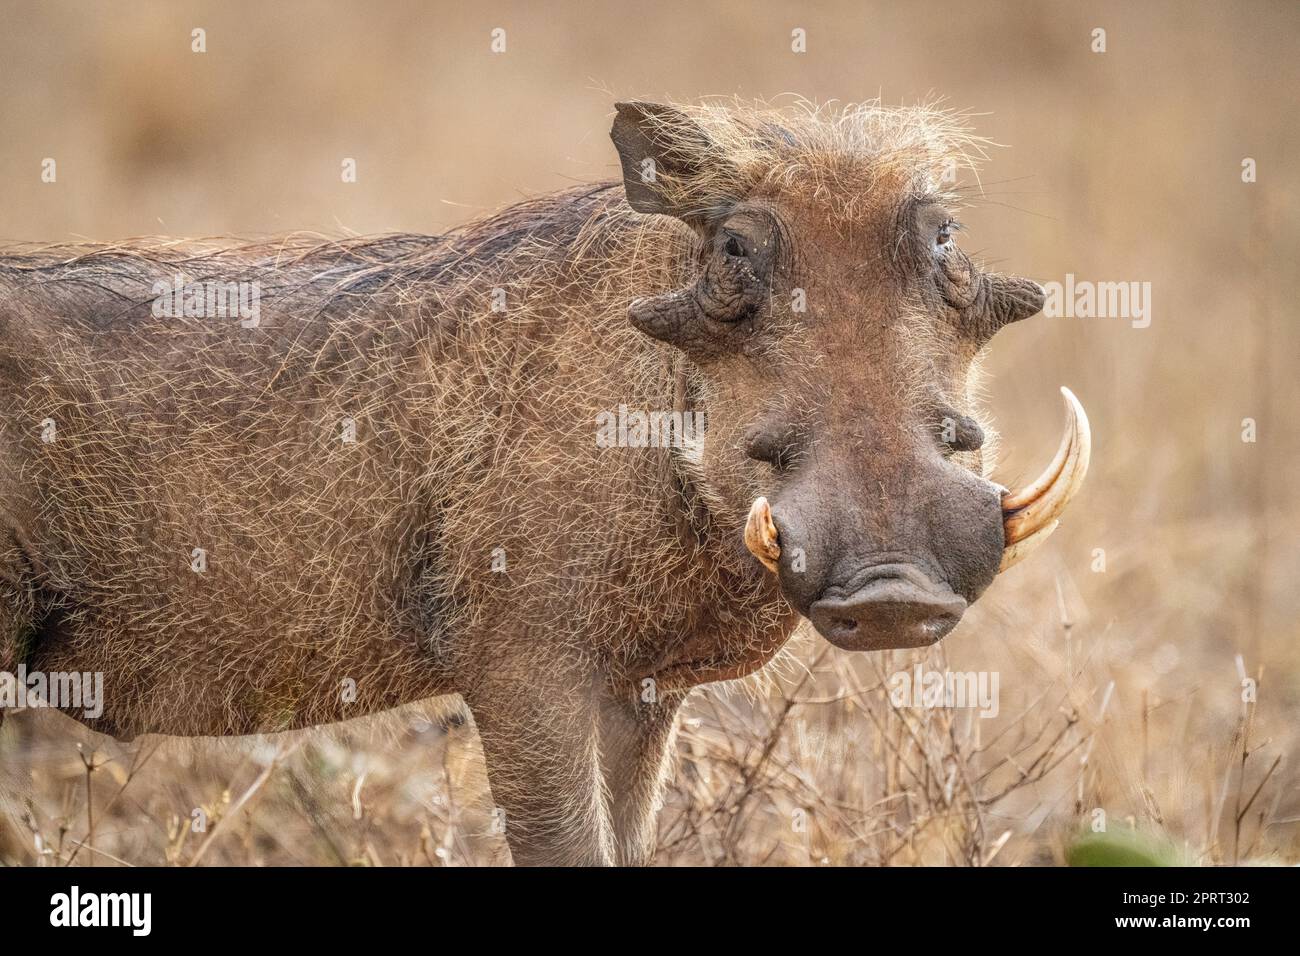 Close-up of common warthog with missing tusk Stock Photo